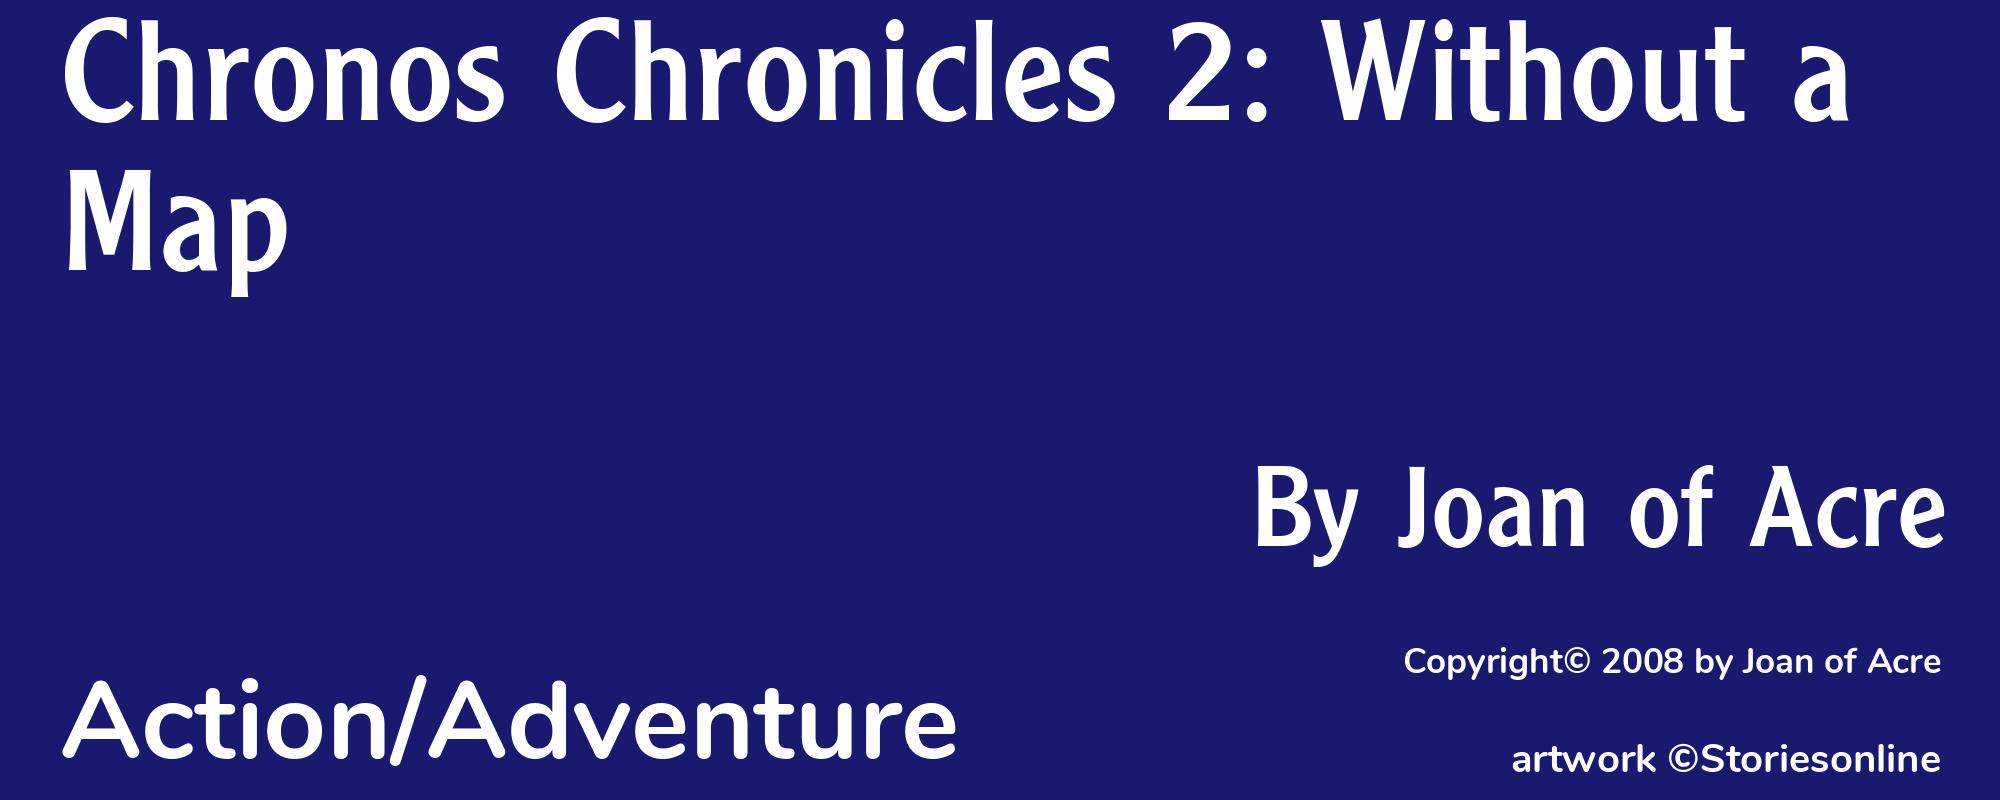 Chronos Chronicles 2: Without a Map - Cover